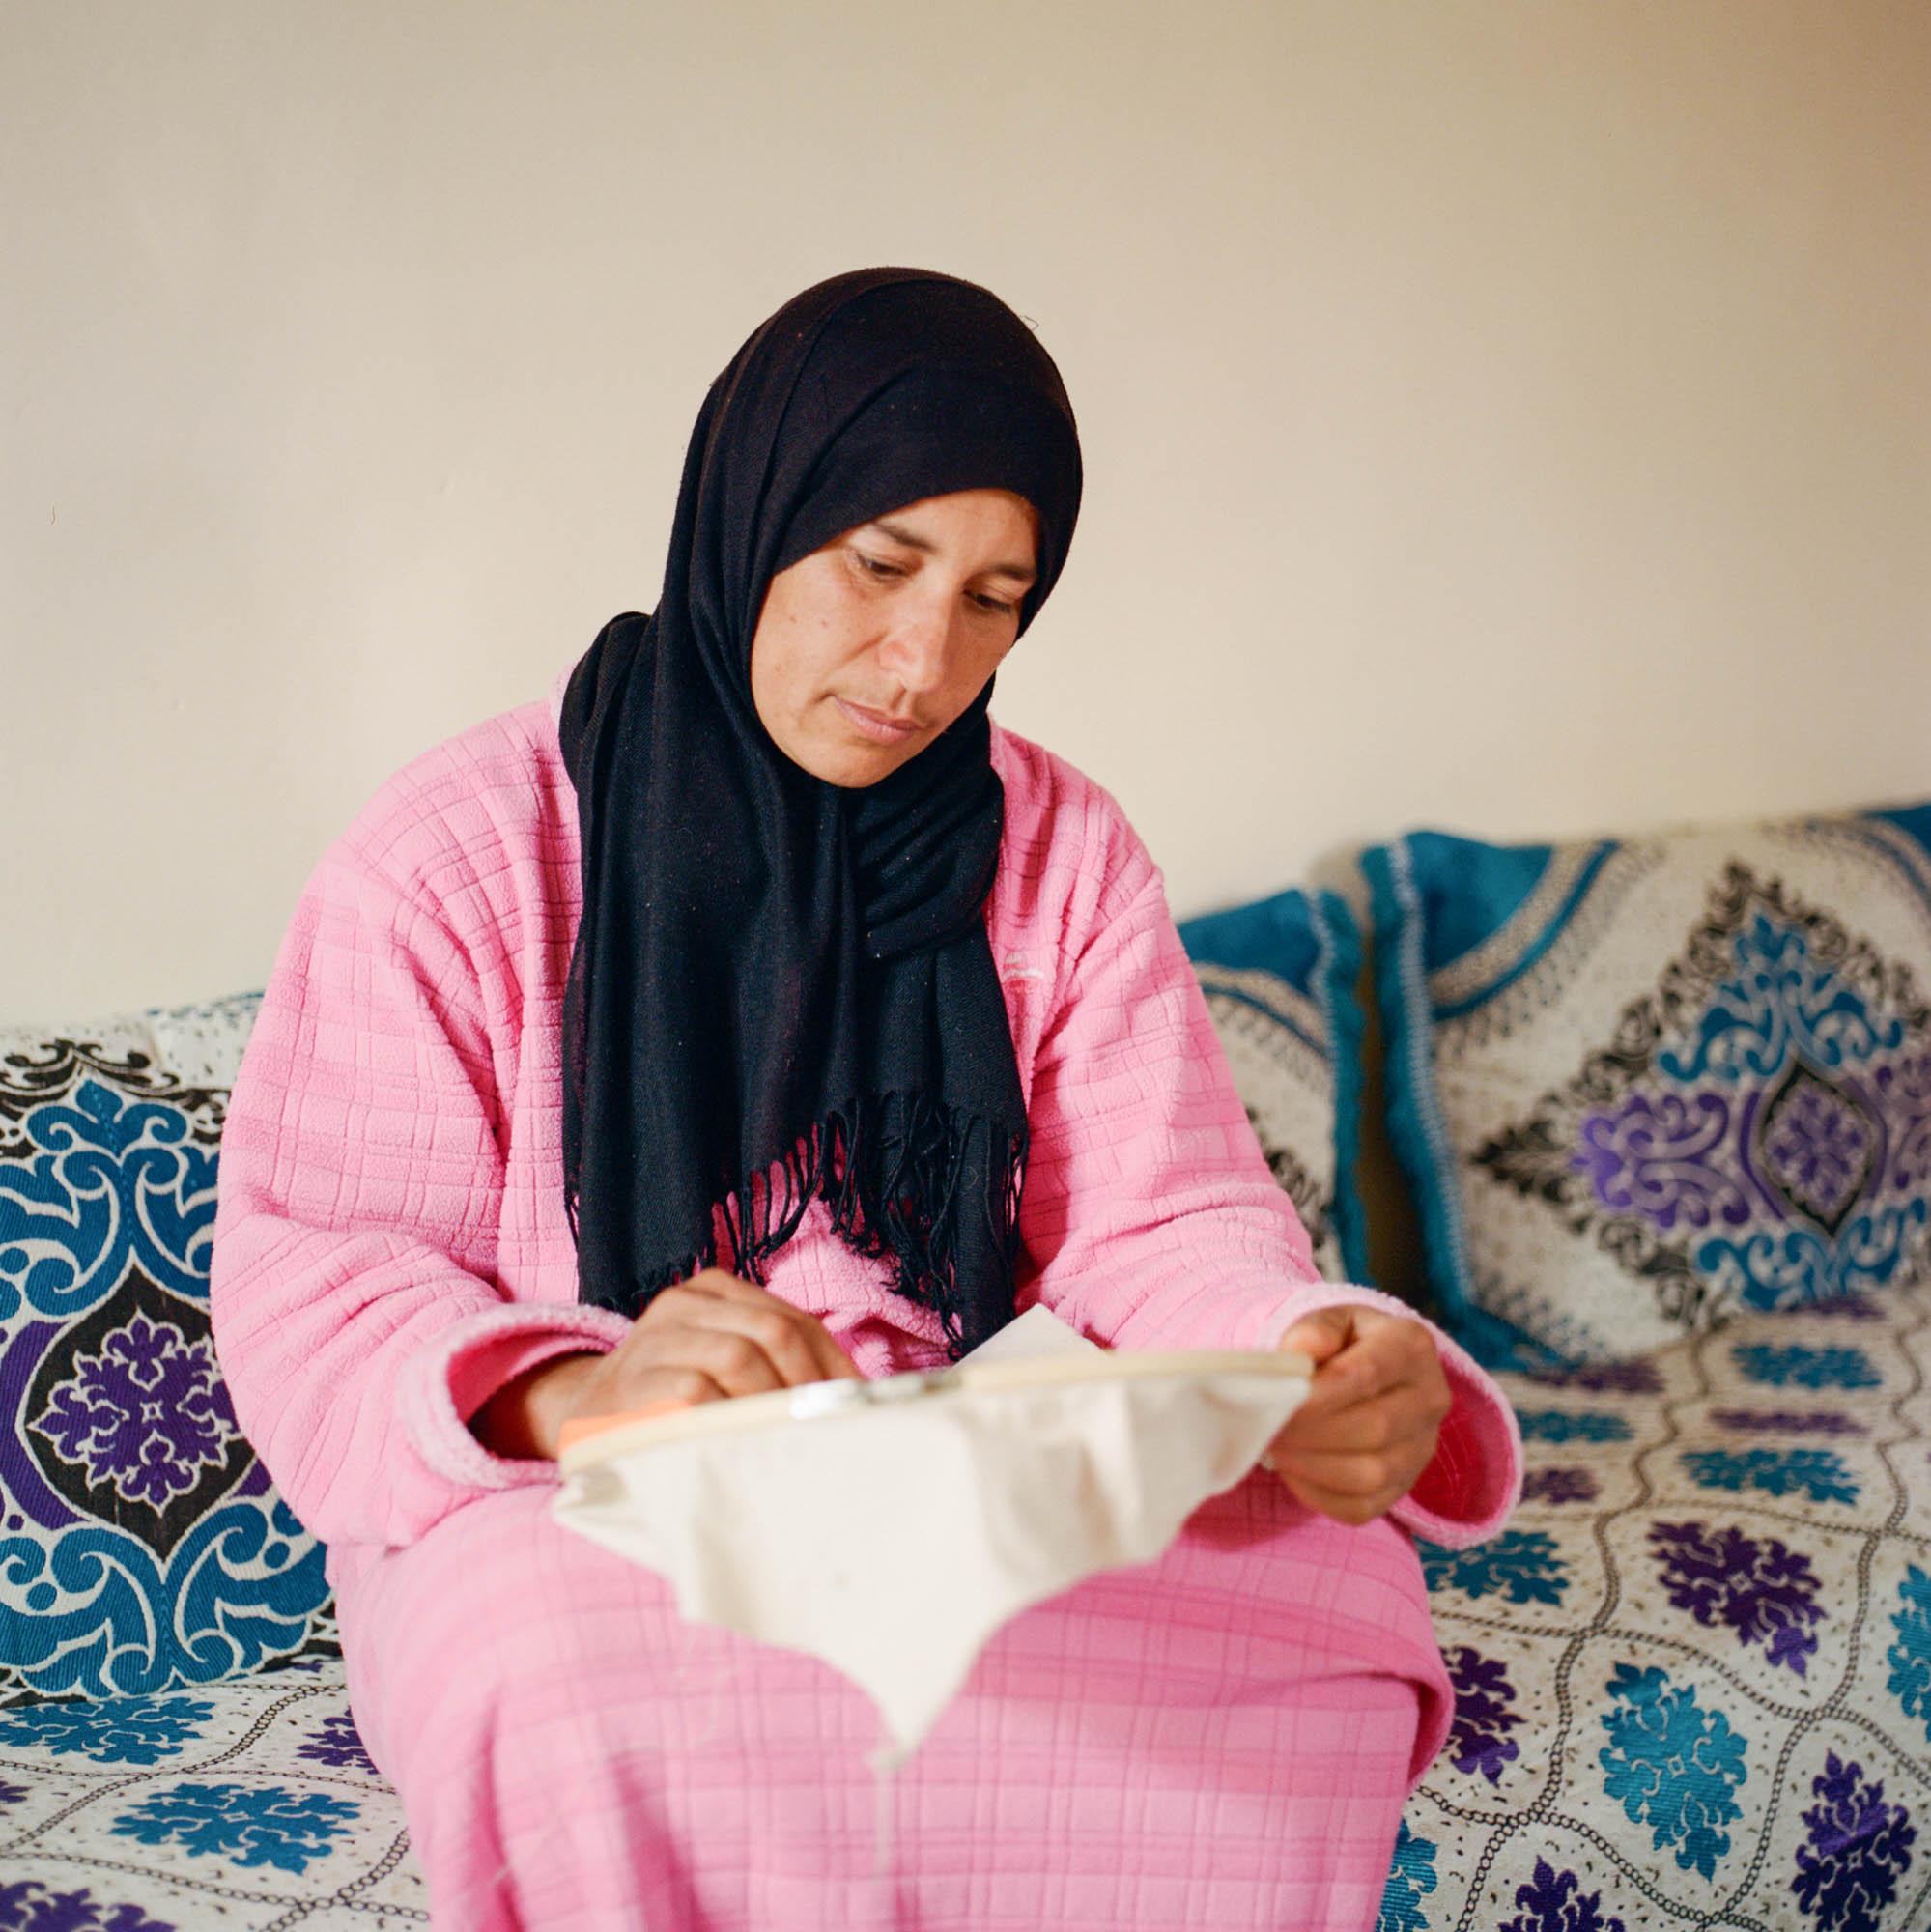 Before it's gone  - Zakia sewing peacefully at home in the oasis of Skoura  